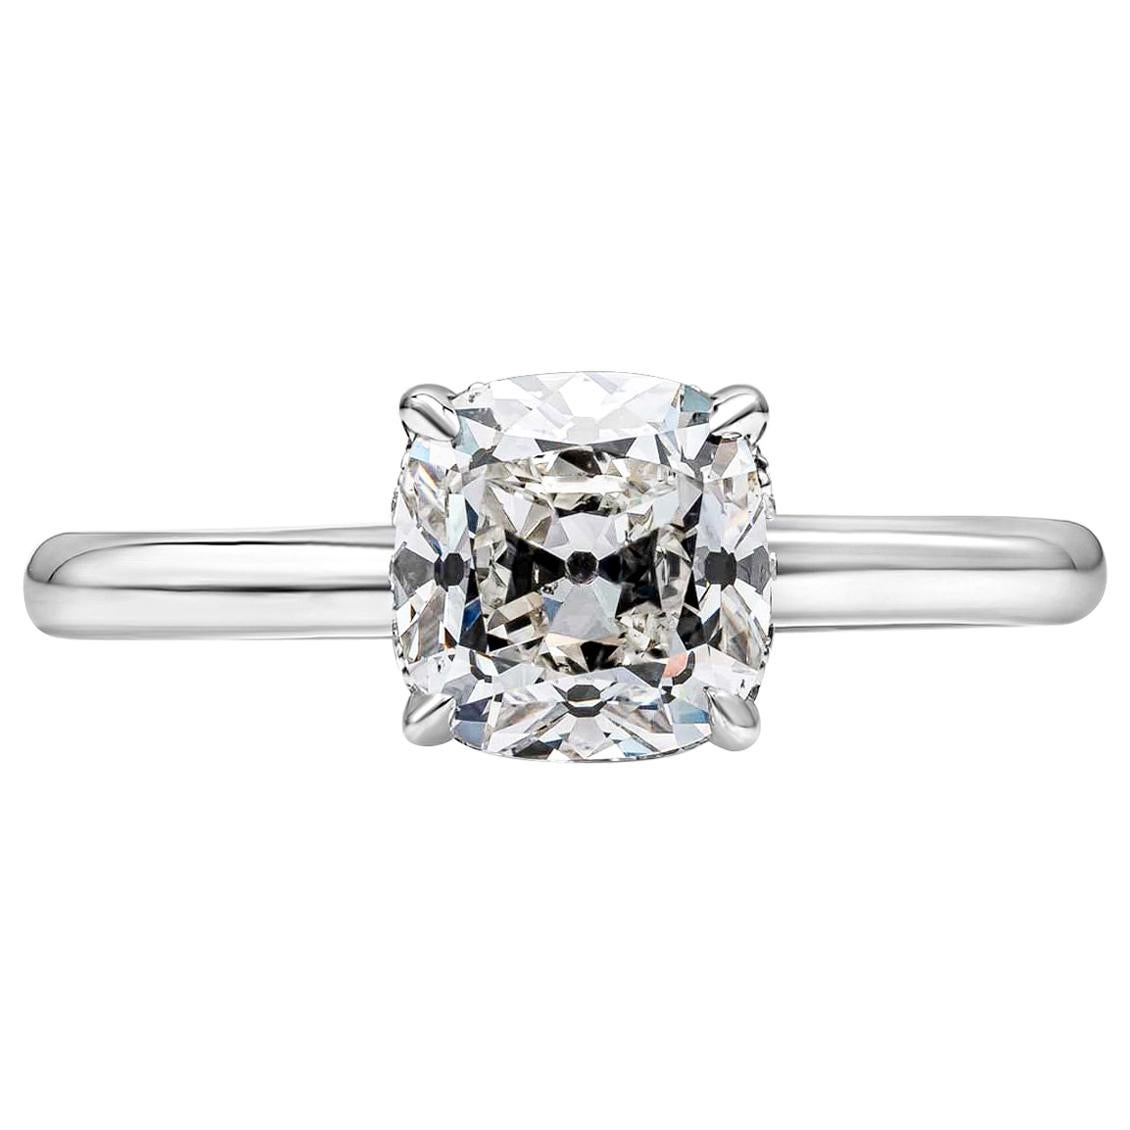 GIA Certified 1.72 Carat Antique Cushion Cut Diamond Solitaire Engagement Ring